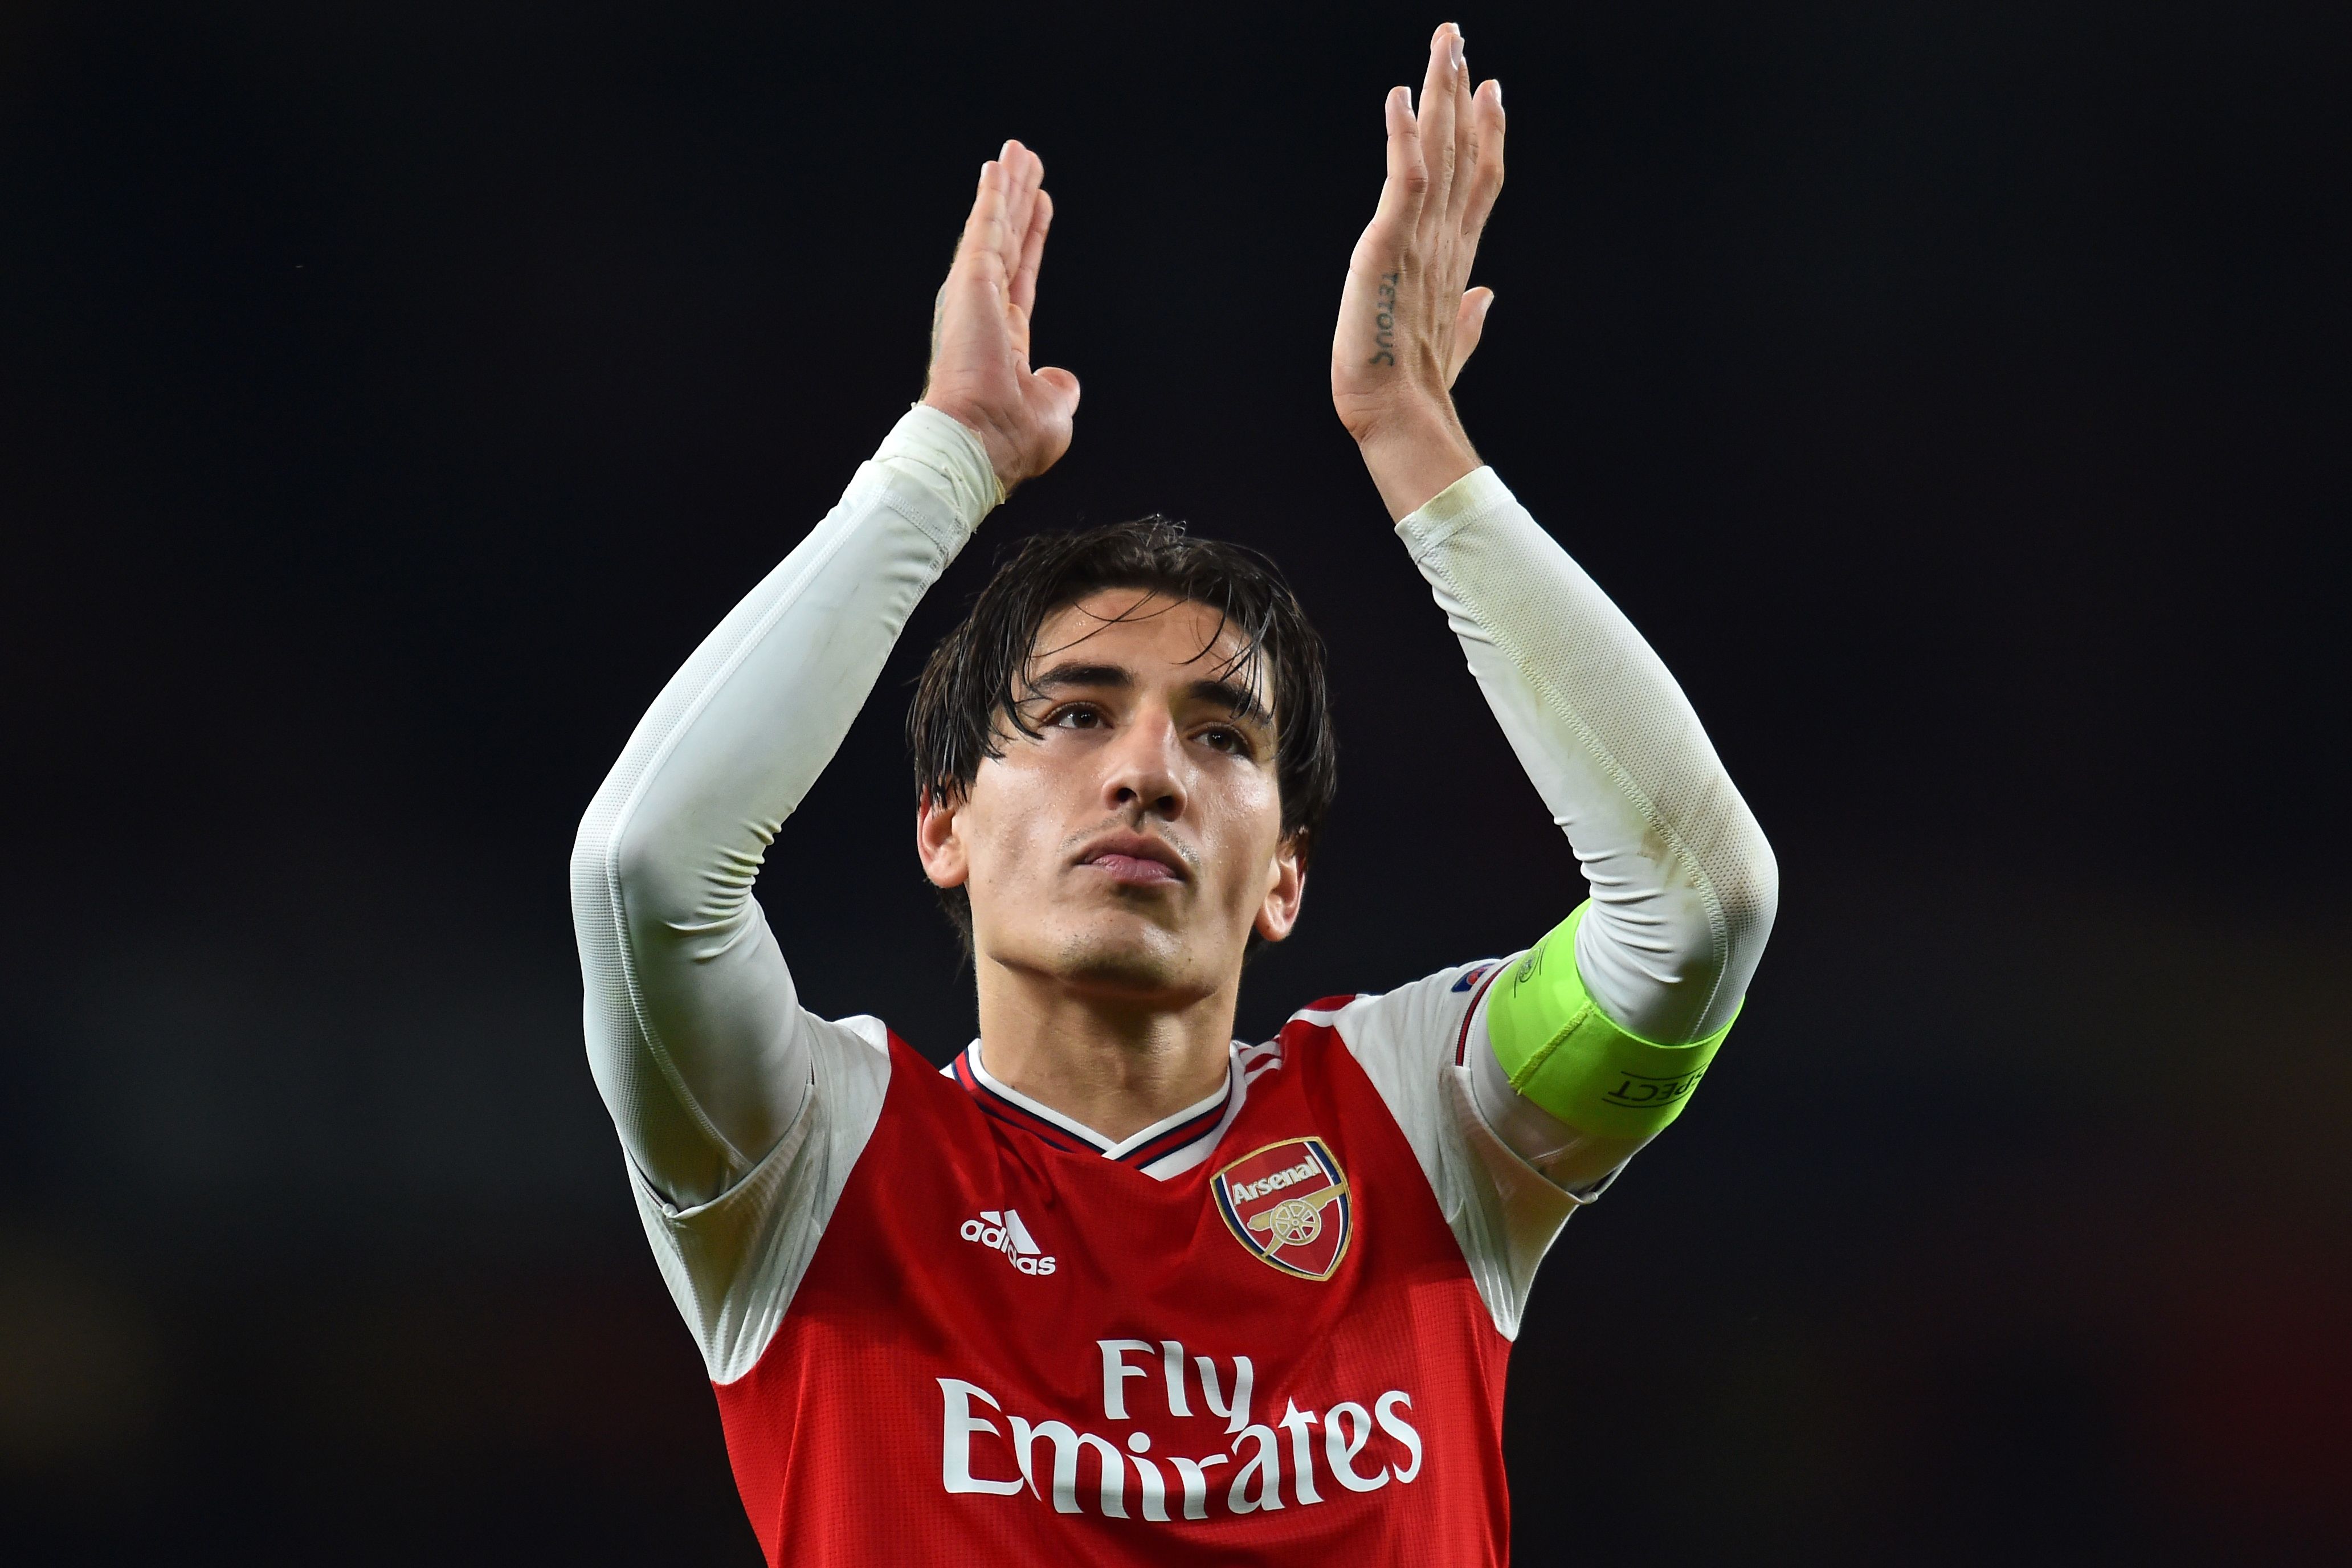 Arsenal's Spanish defender Hector Bellerin applauds as he celebrates on the pitch after the UEFA Europa League Group F football match between Arsenal and Standard Liege at the Arsenal Stadium in London on October 3, 2019. - Arsenal won the game 4-0. (Photo by Glyn KIRK / AFP) (Photo by GLYN KIRK/AFP via Getty Images)